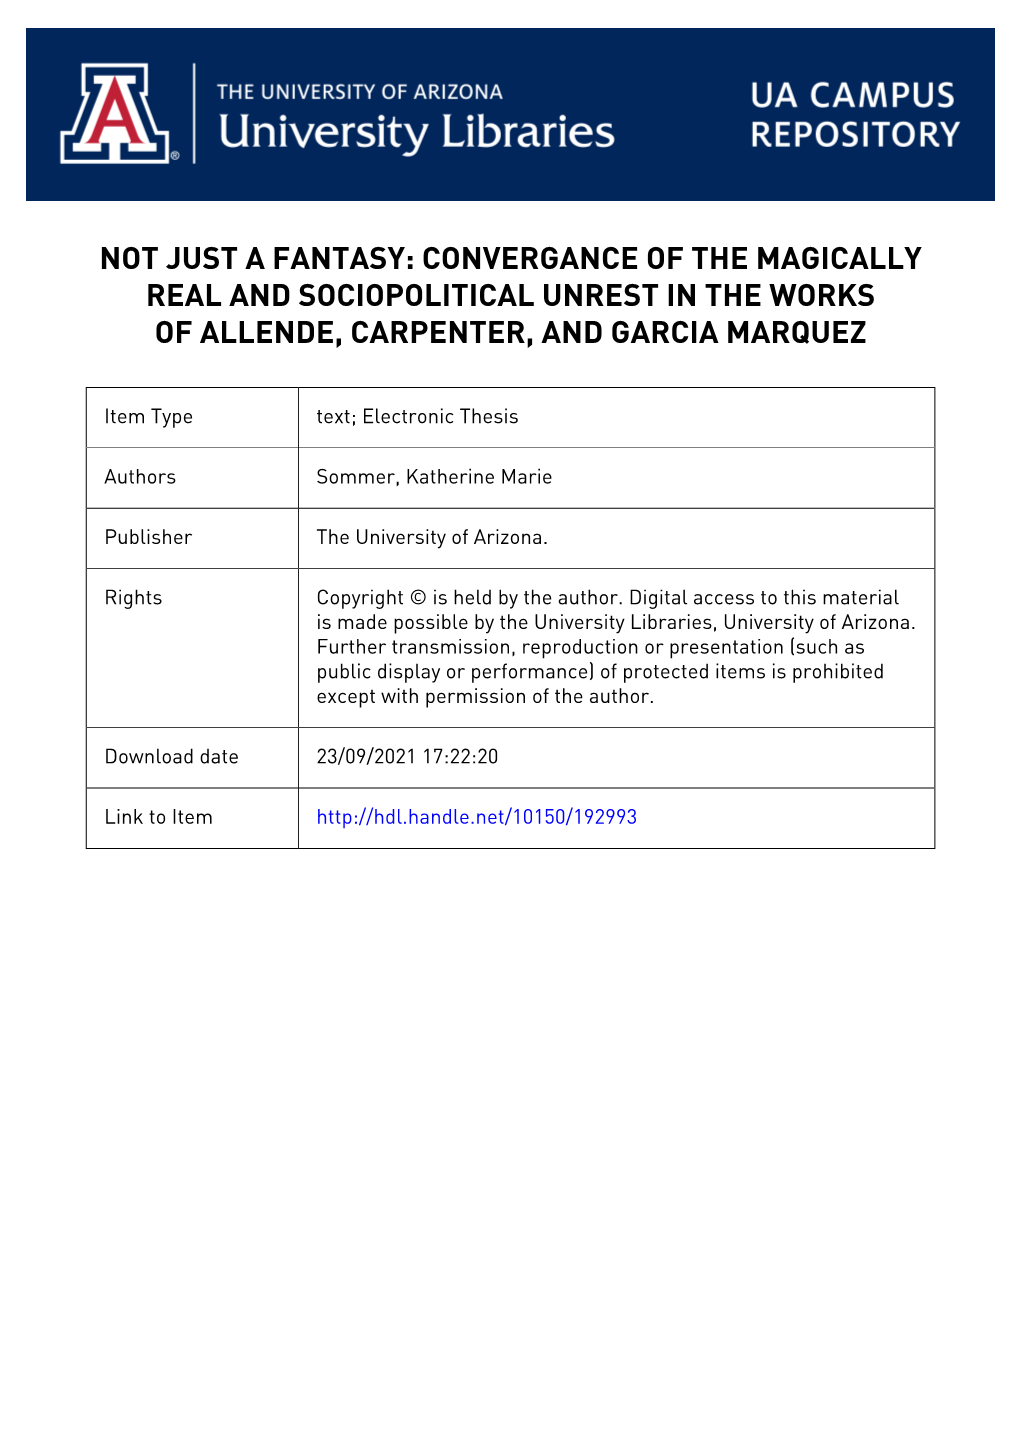 Not Just a Fantasy: Convergance of the Magically Real and Sociopolitical Unrest in the Works of Allende, Carpenter, and Garcia Marquez